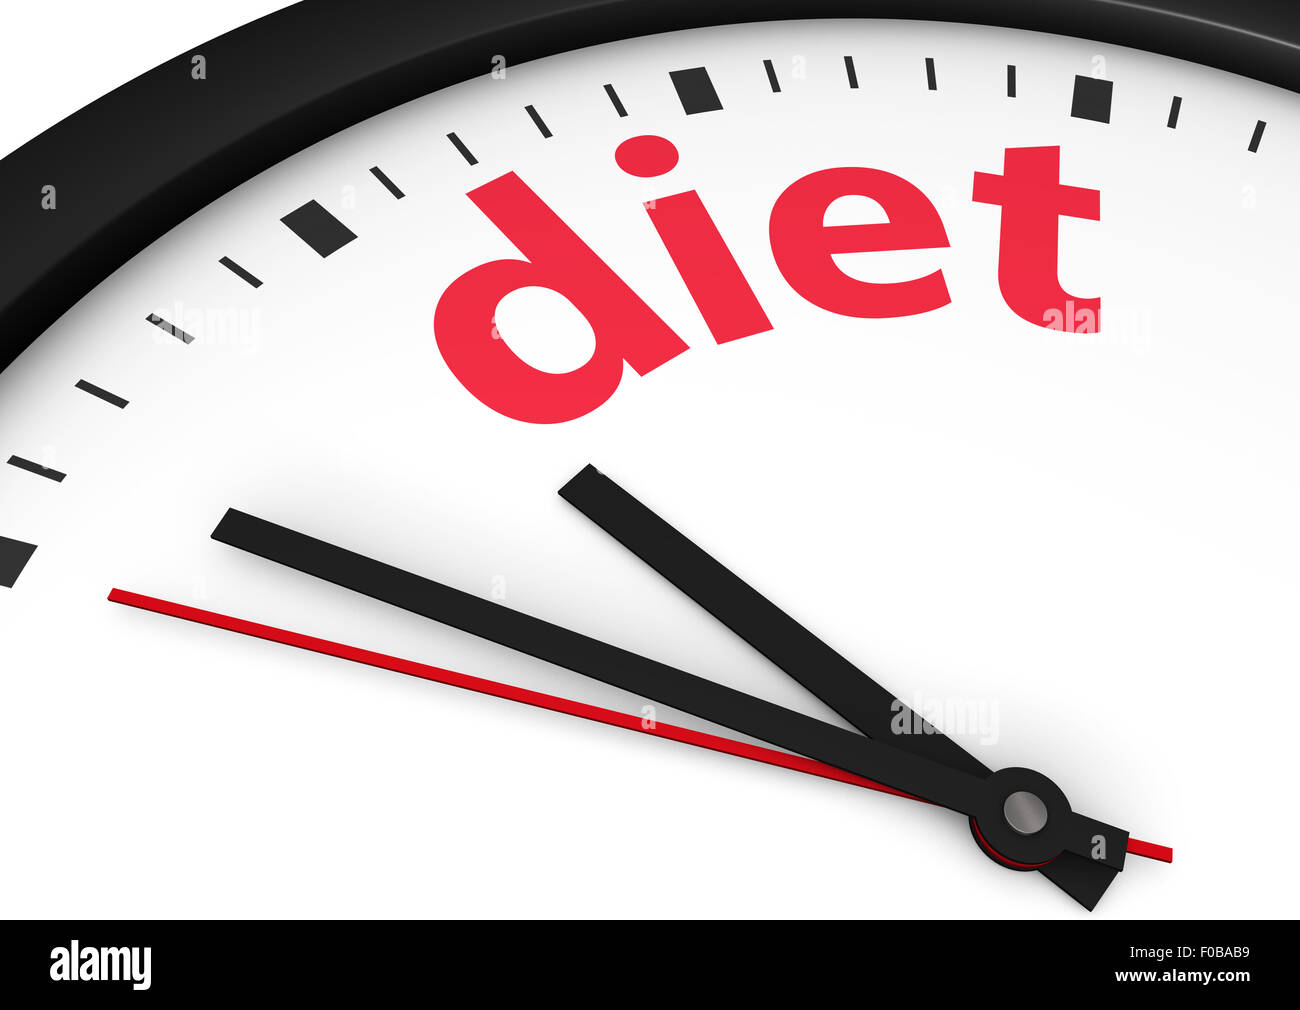 Time for weight lose healthy lifestyle conceptual image with a wall clock and diet text printed in red. Stock Photo